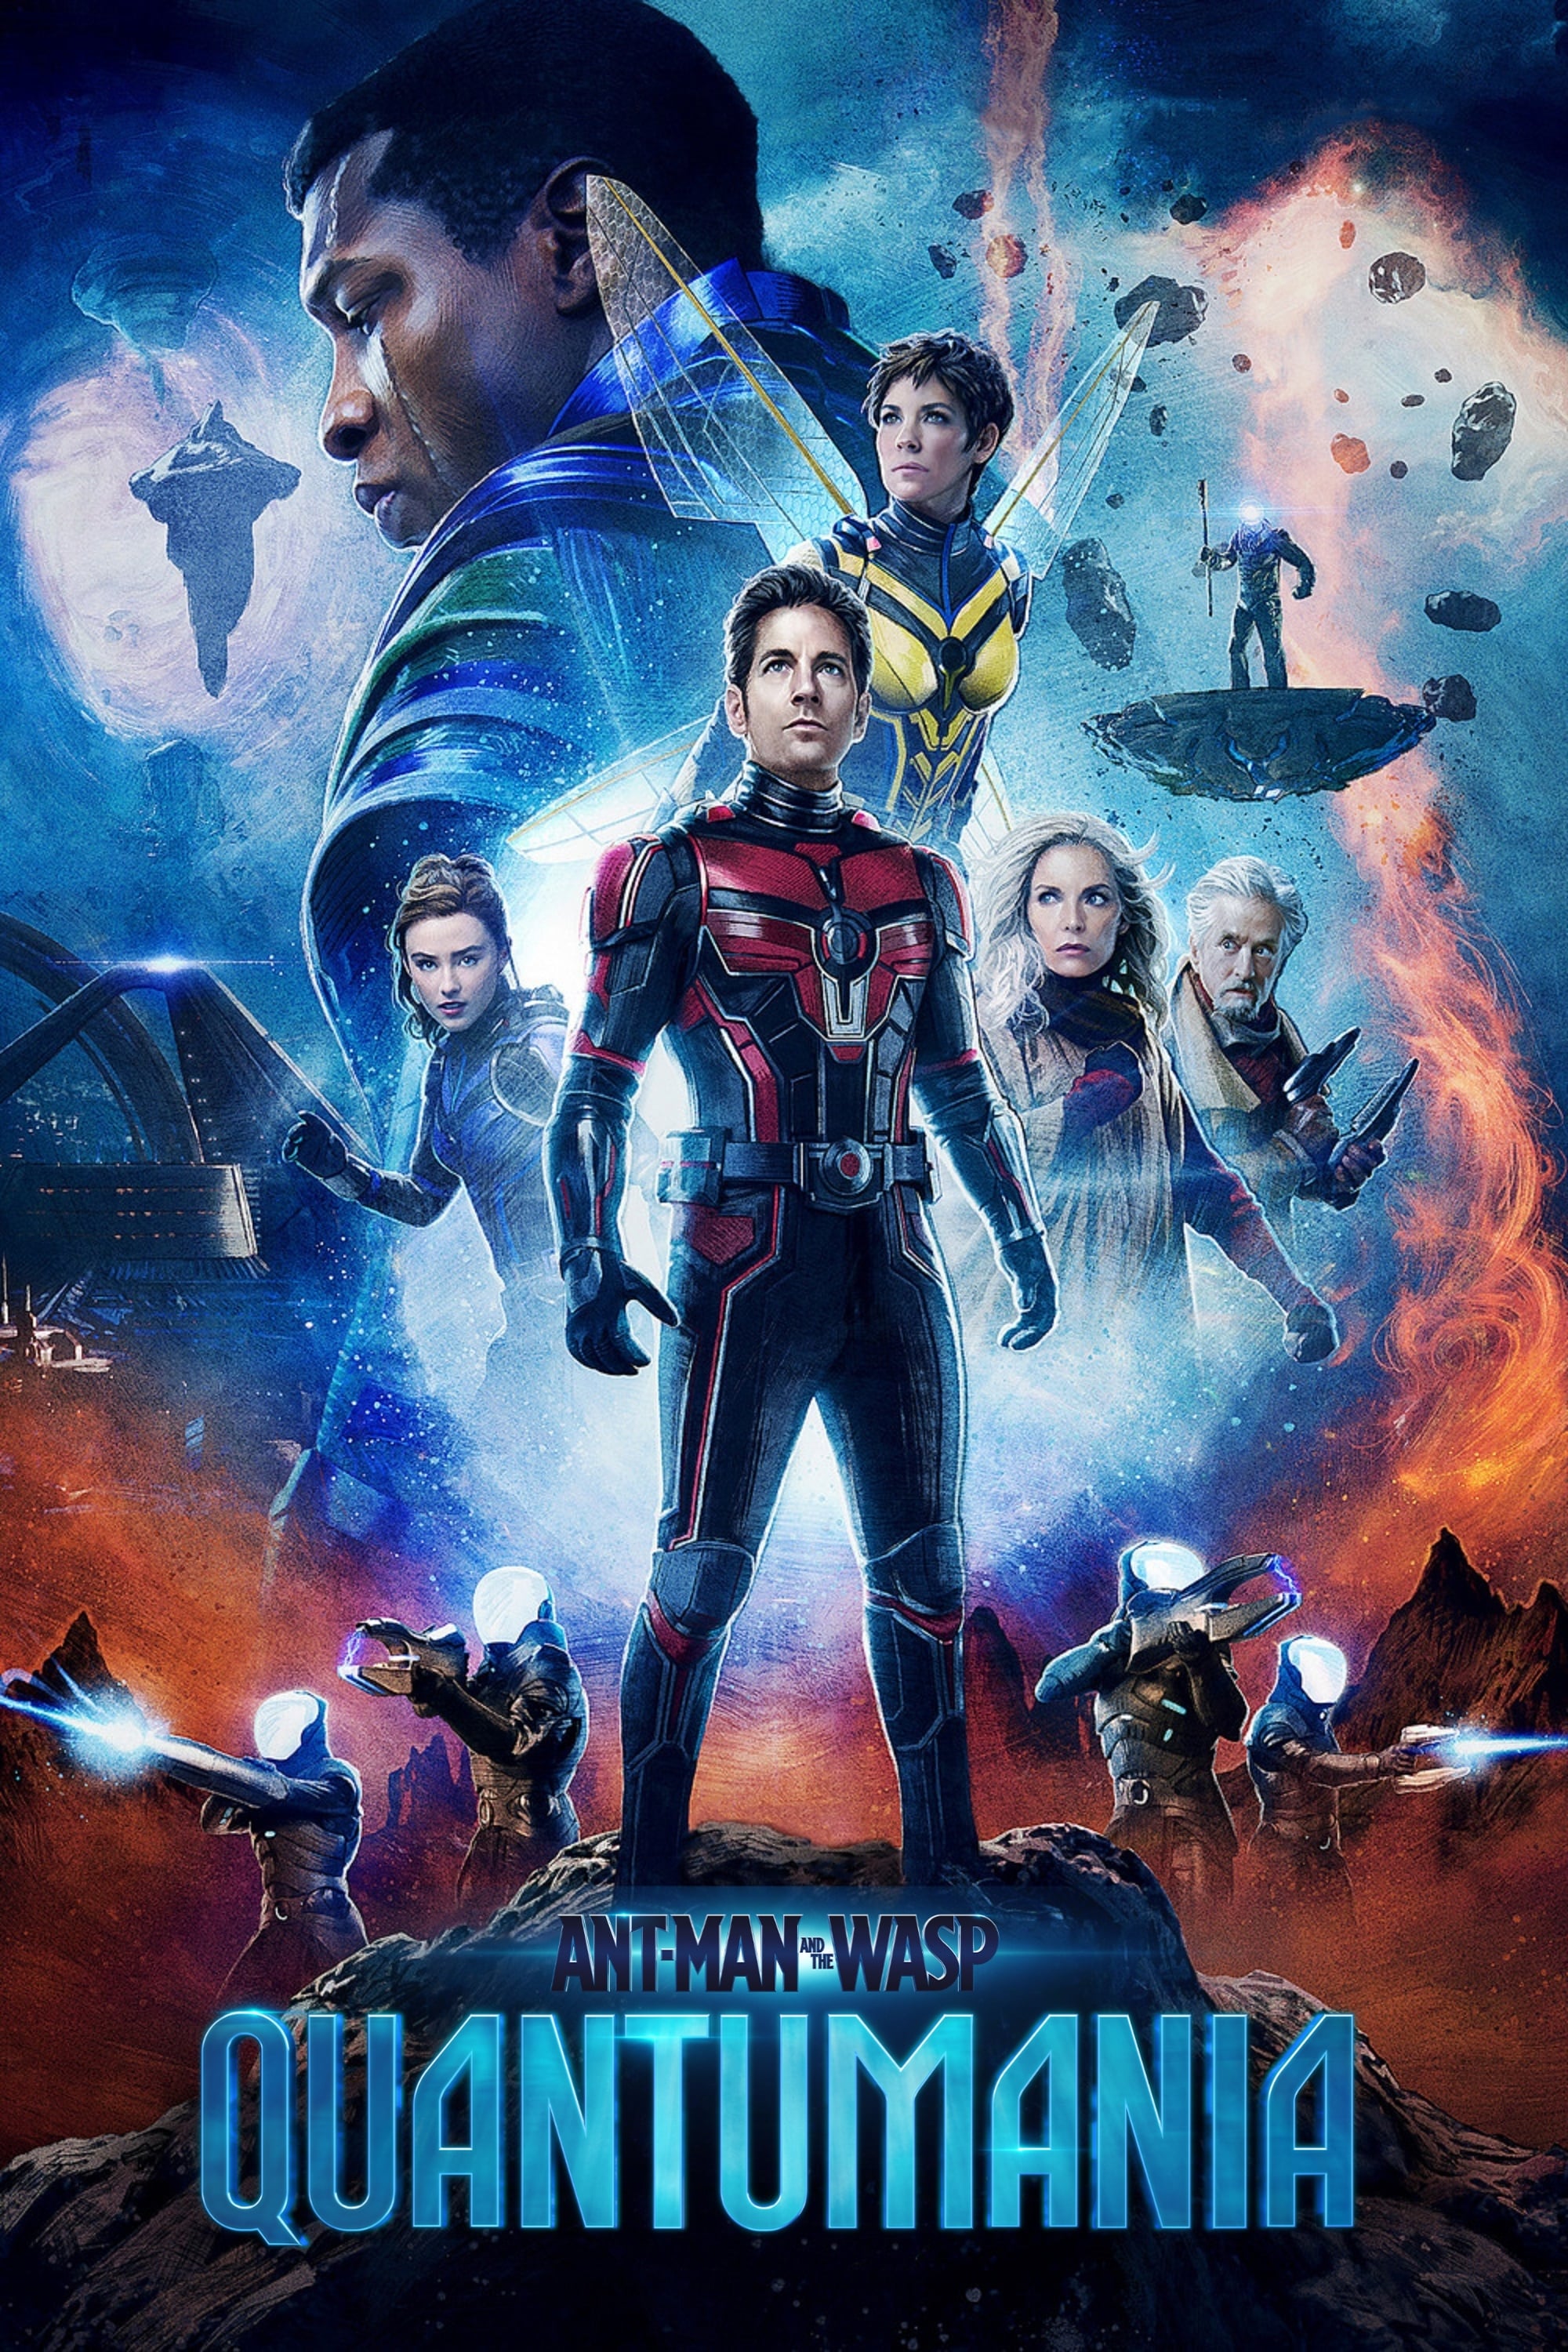 Ant-Man and the Wasp: Quantumania poster - indiq.net